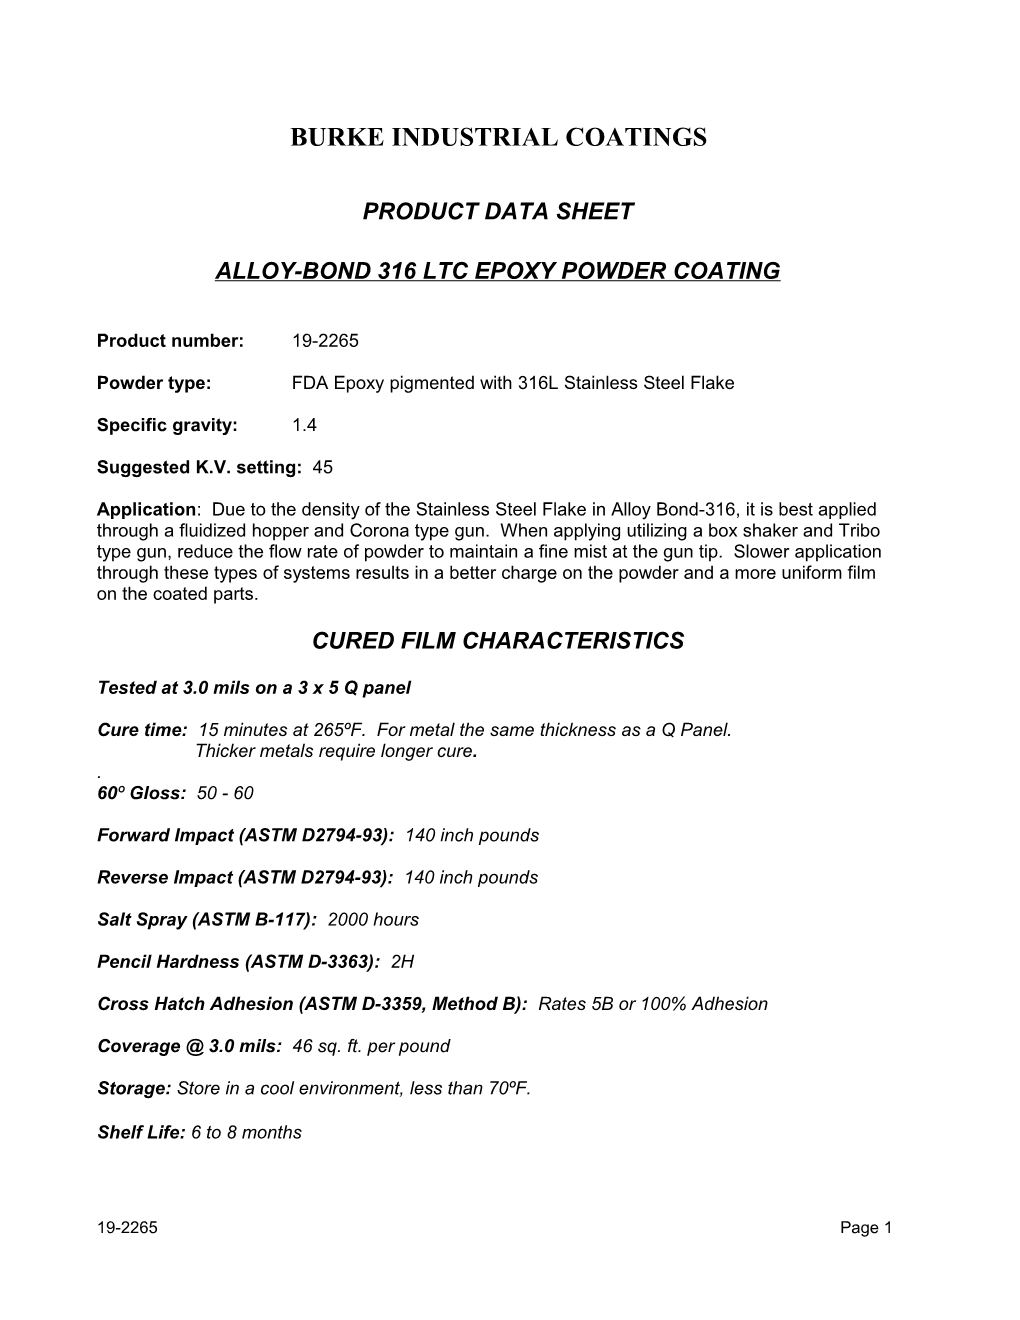 Product Data Sheet s1